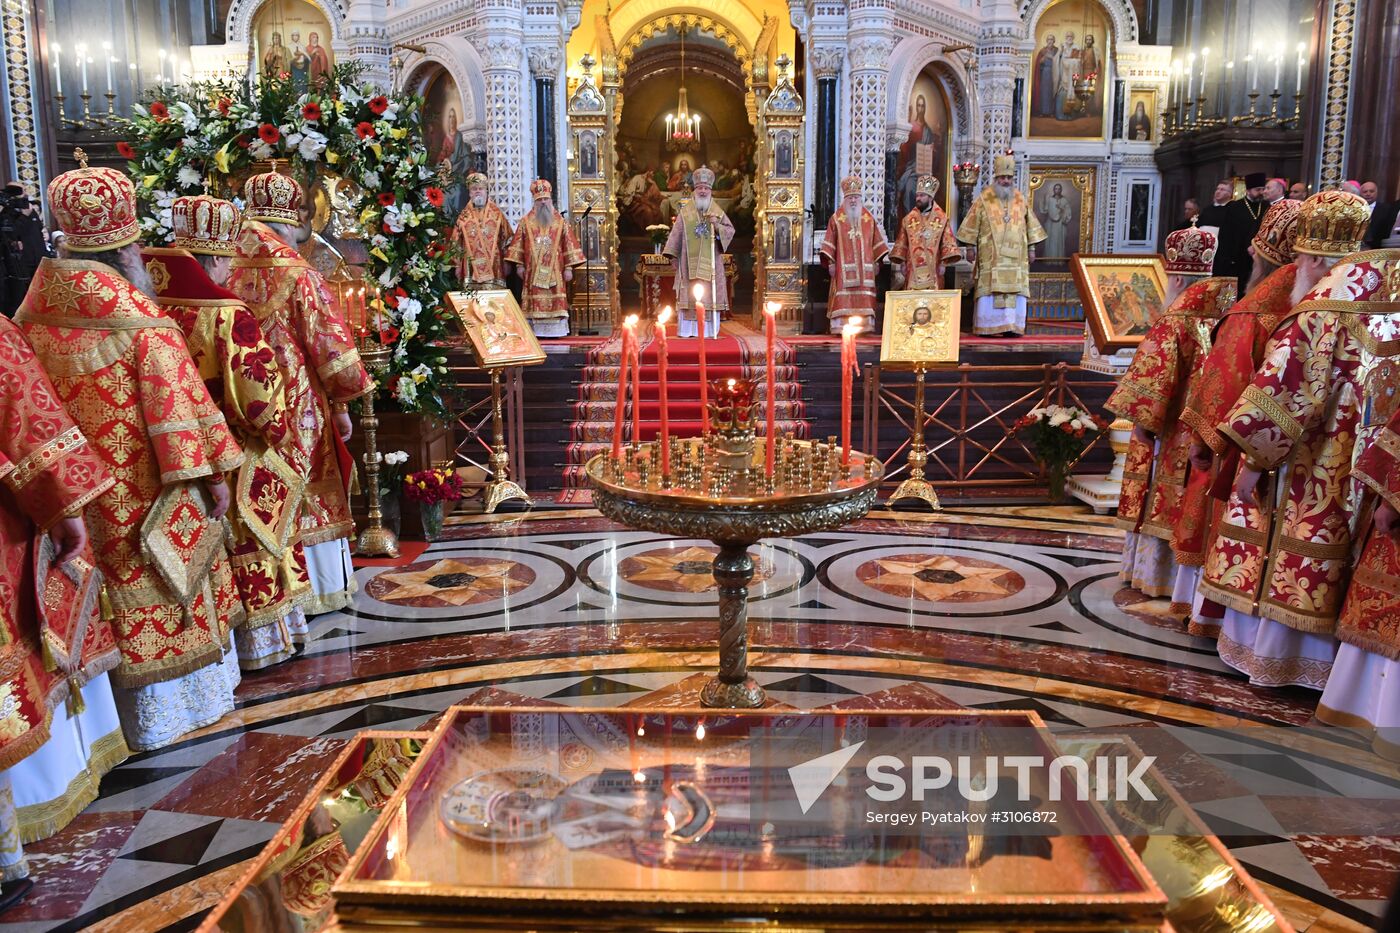 Venerating relics of St. Nicholas the Wonderworker in Christ the Savior Cathedral